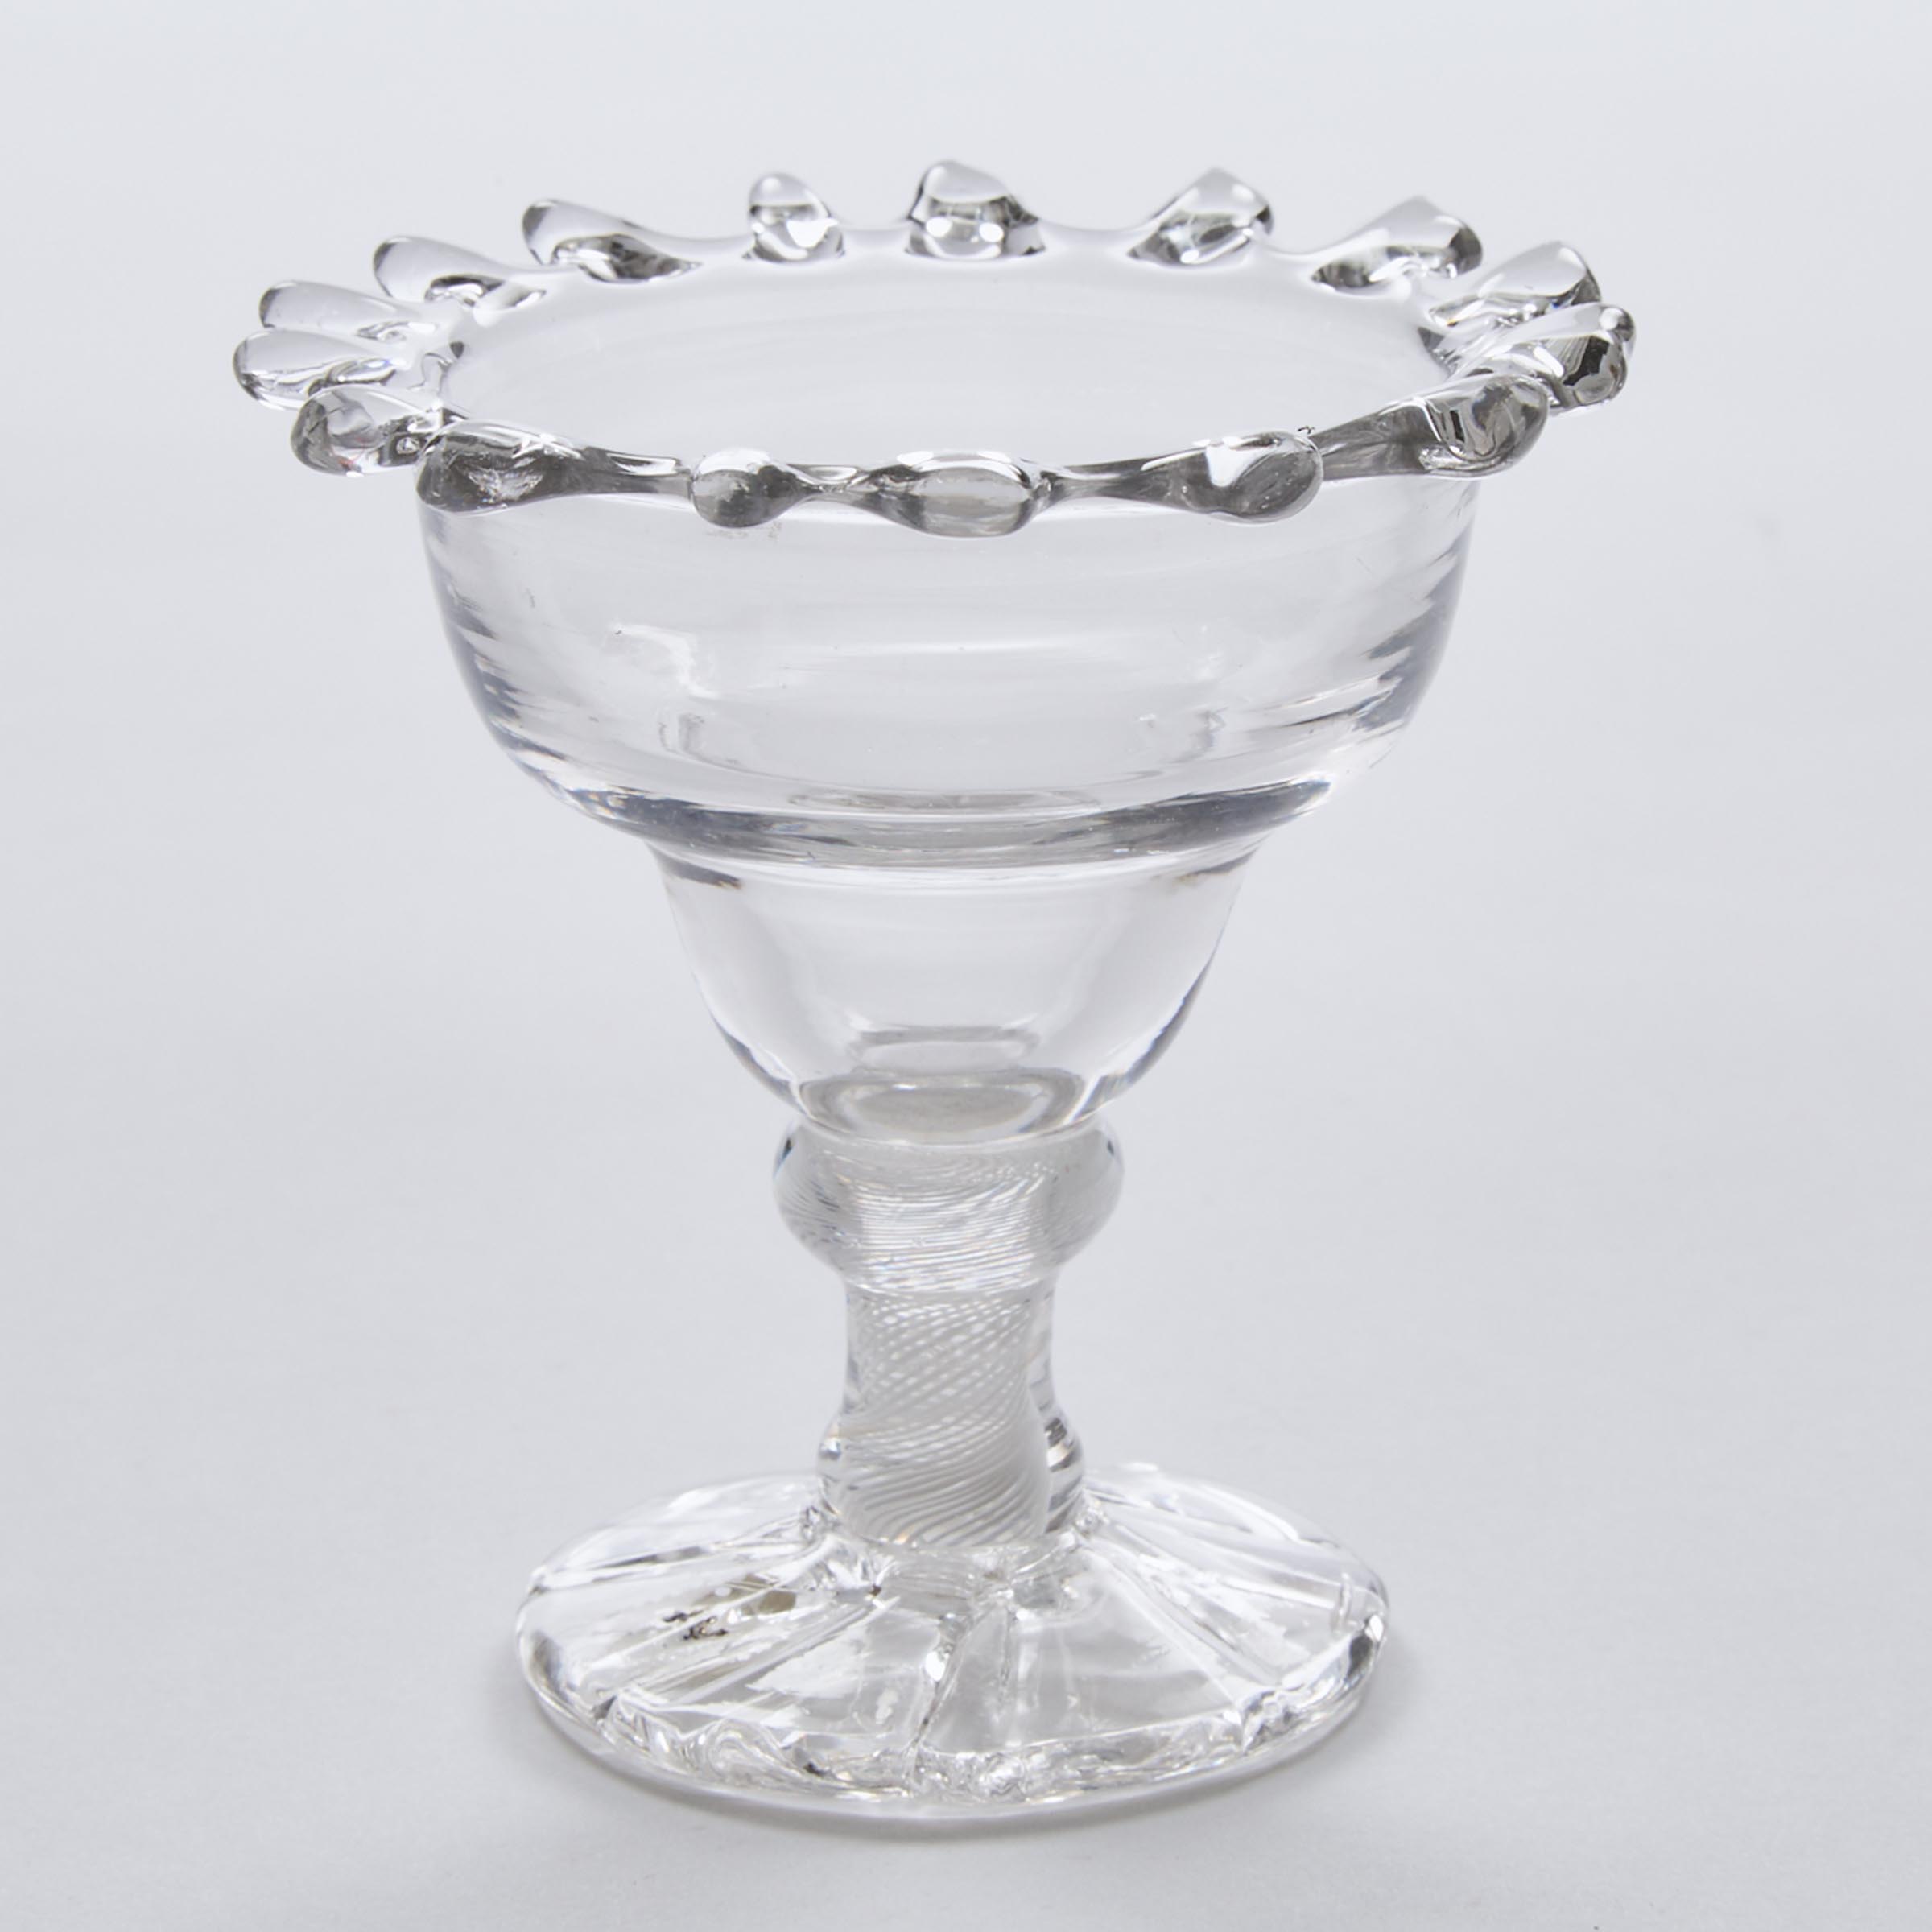 English Opaque Twist Stemmed Low Sweetmeat Glass, c.1760-70